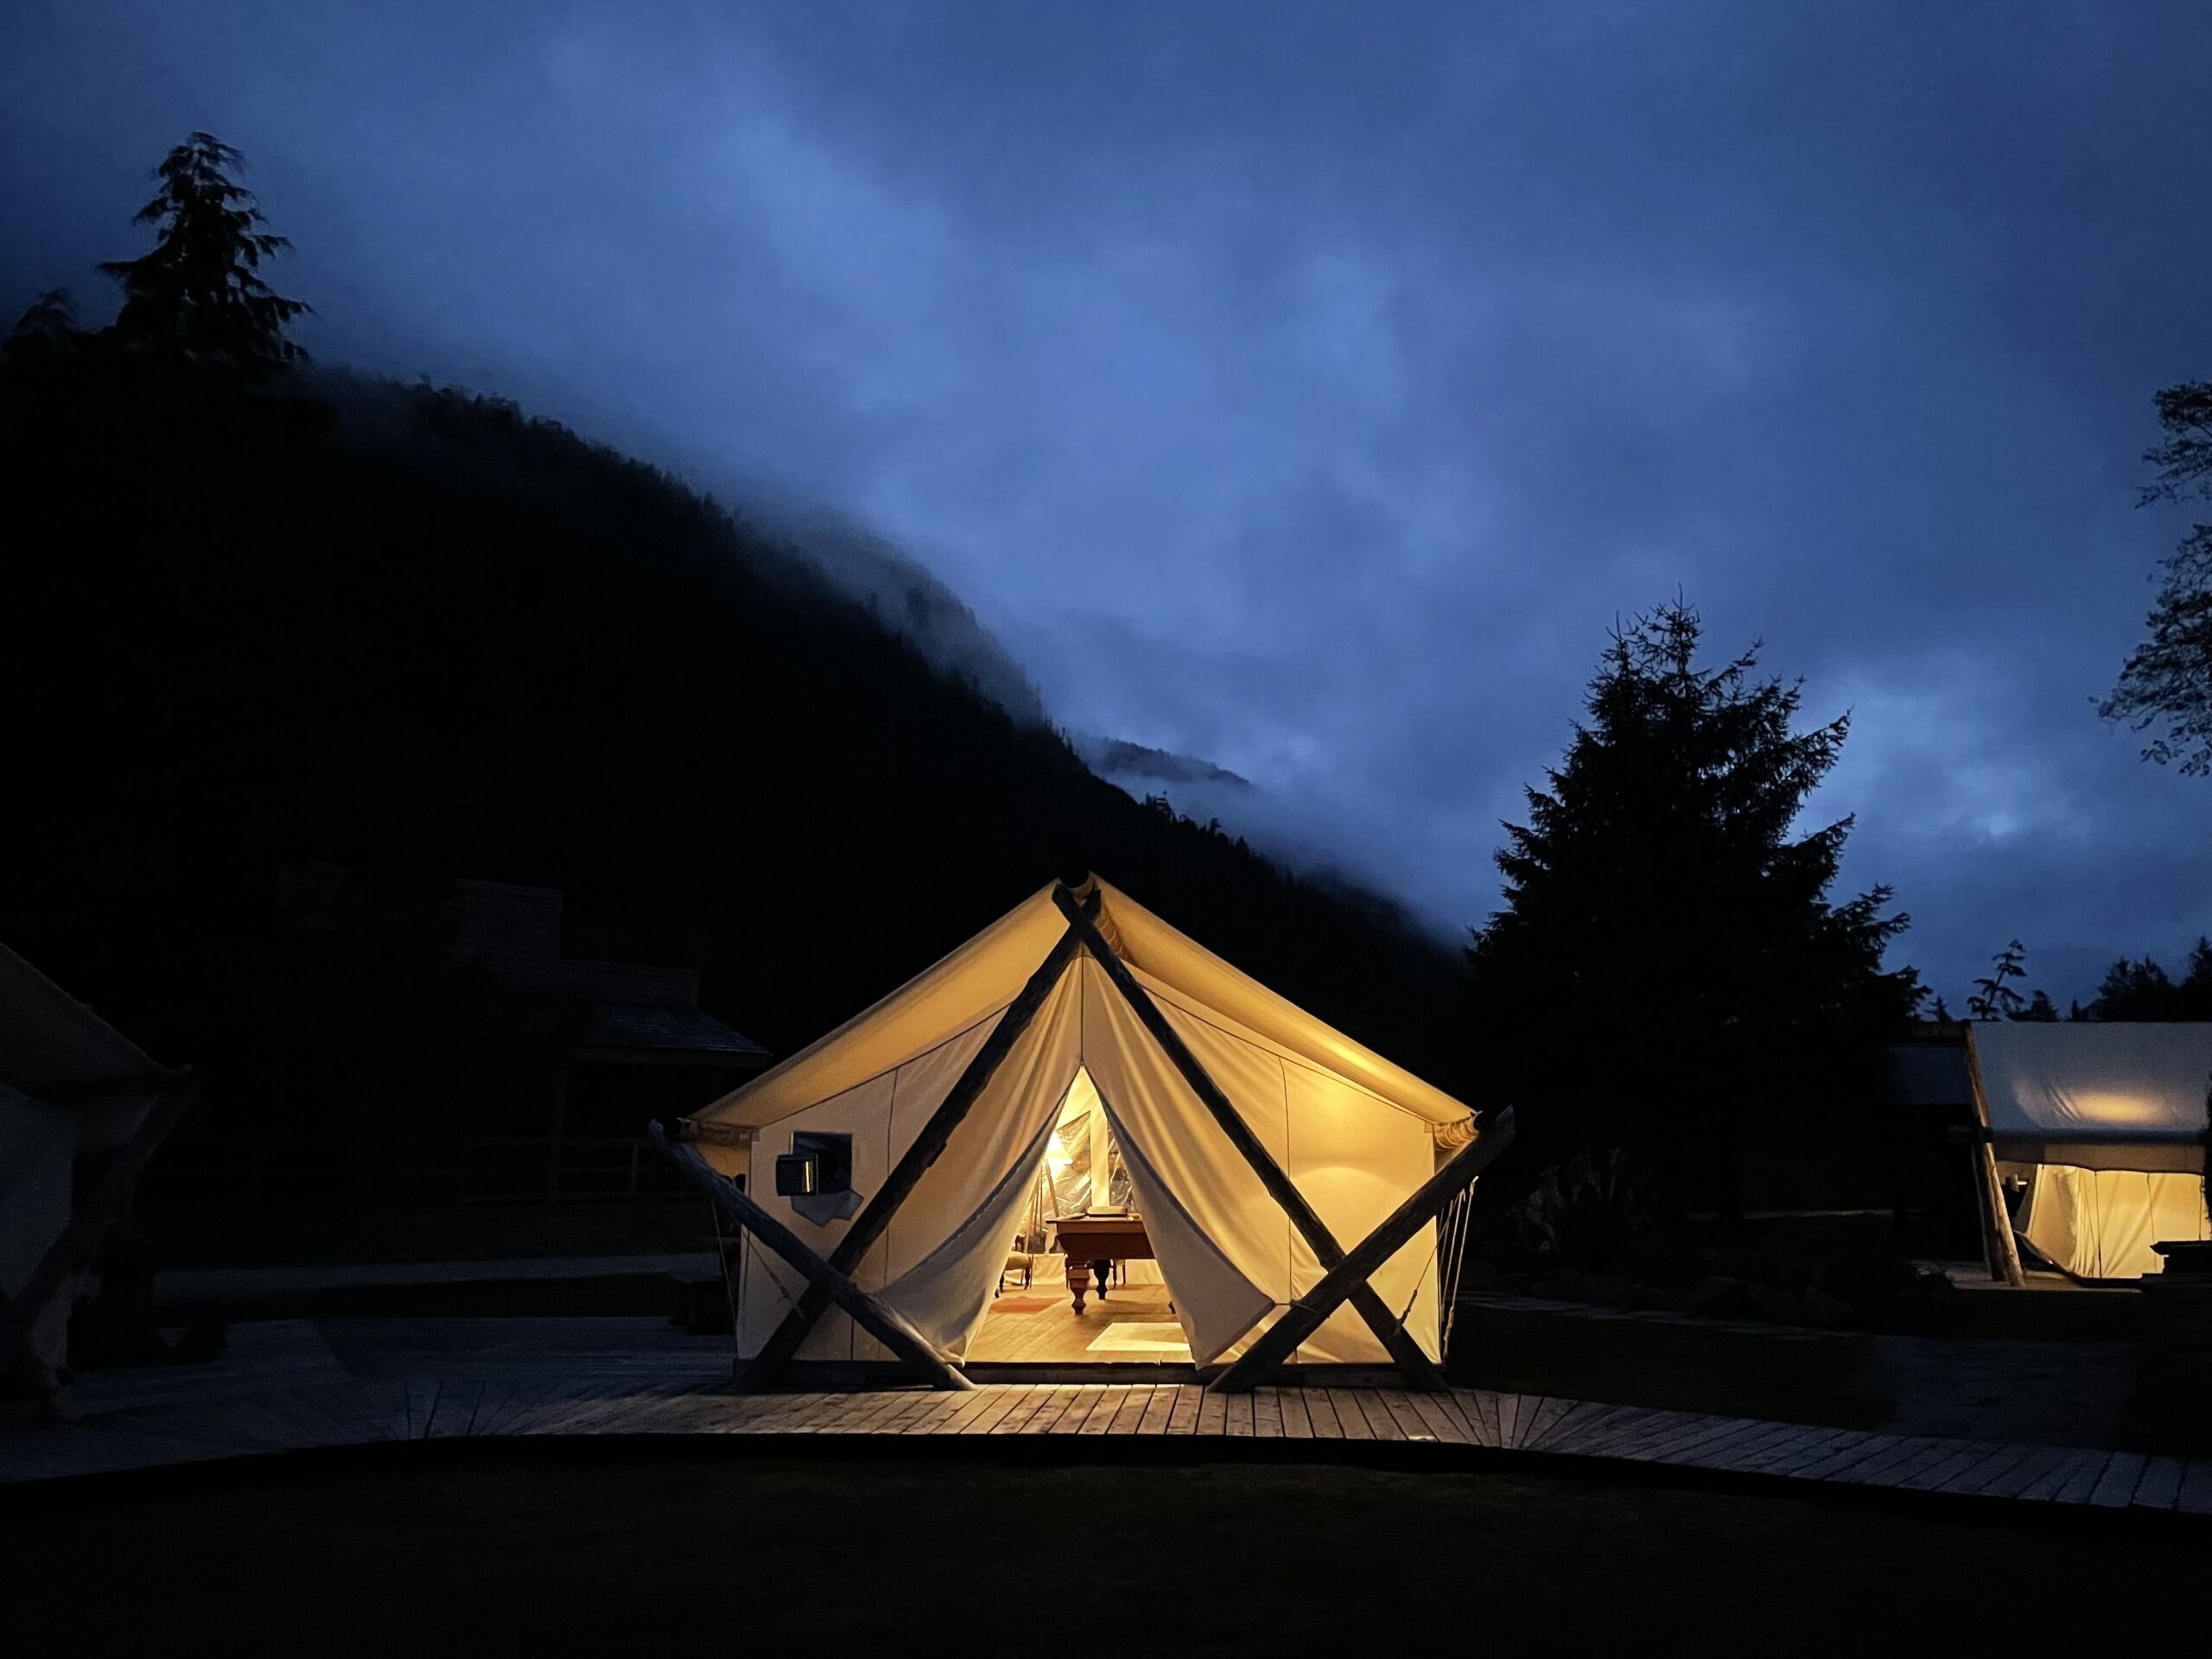 clayoquot wilderness lodge tent at night